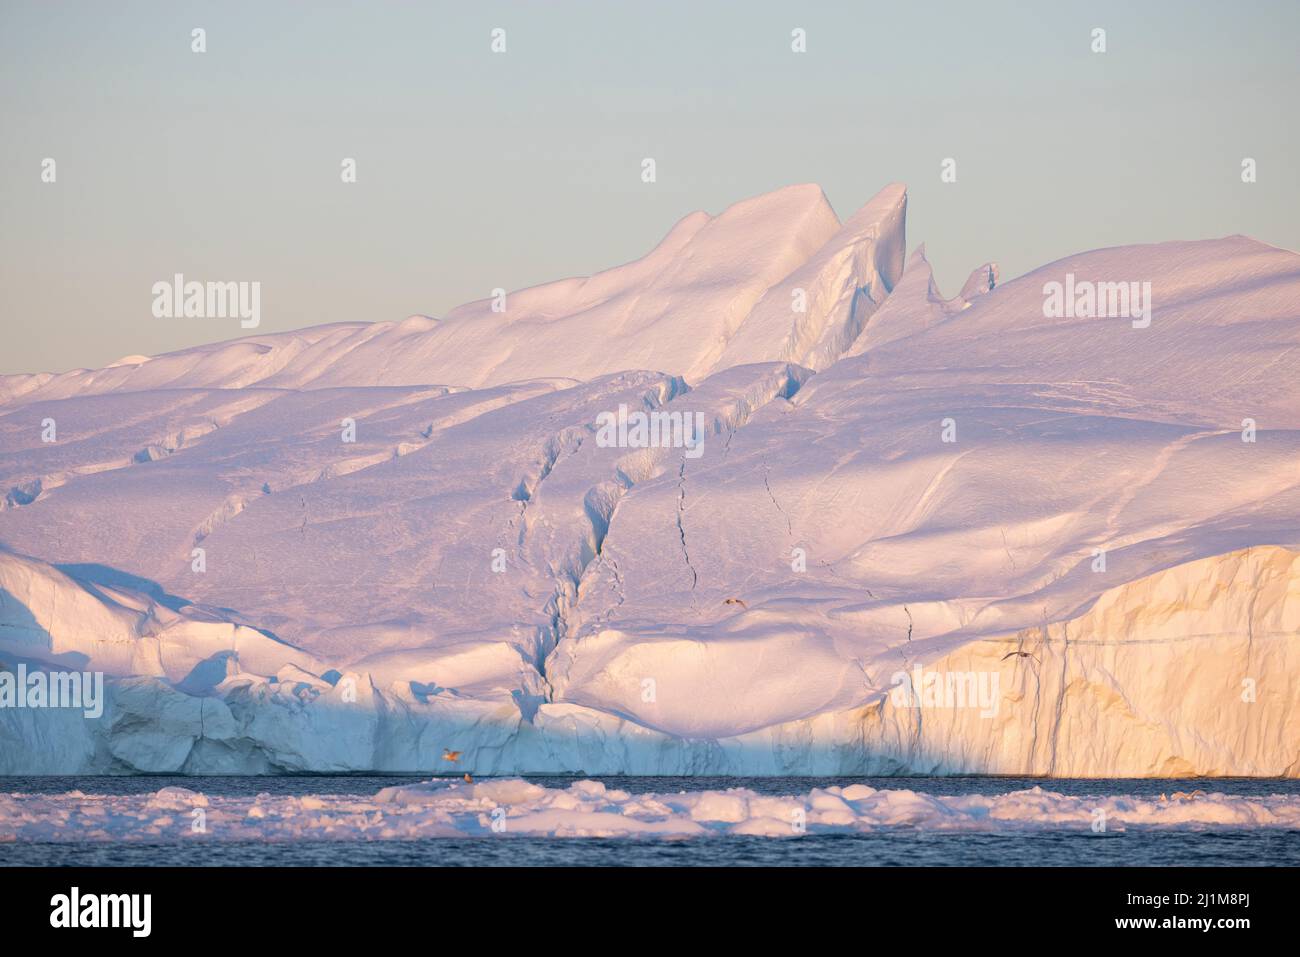 large icebergs floating in the sea in the arctic circle Stock Photo